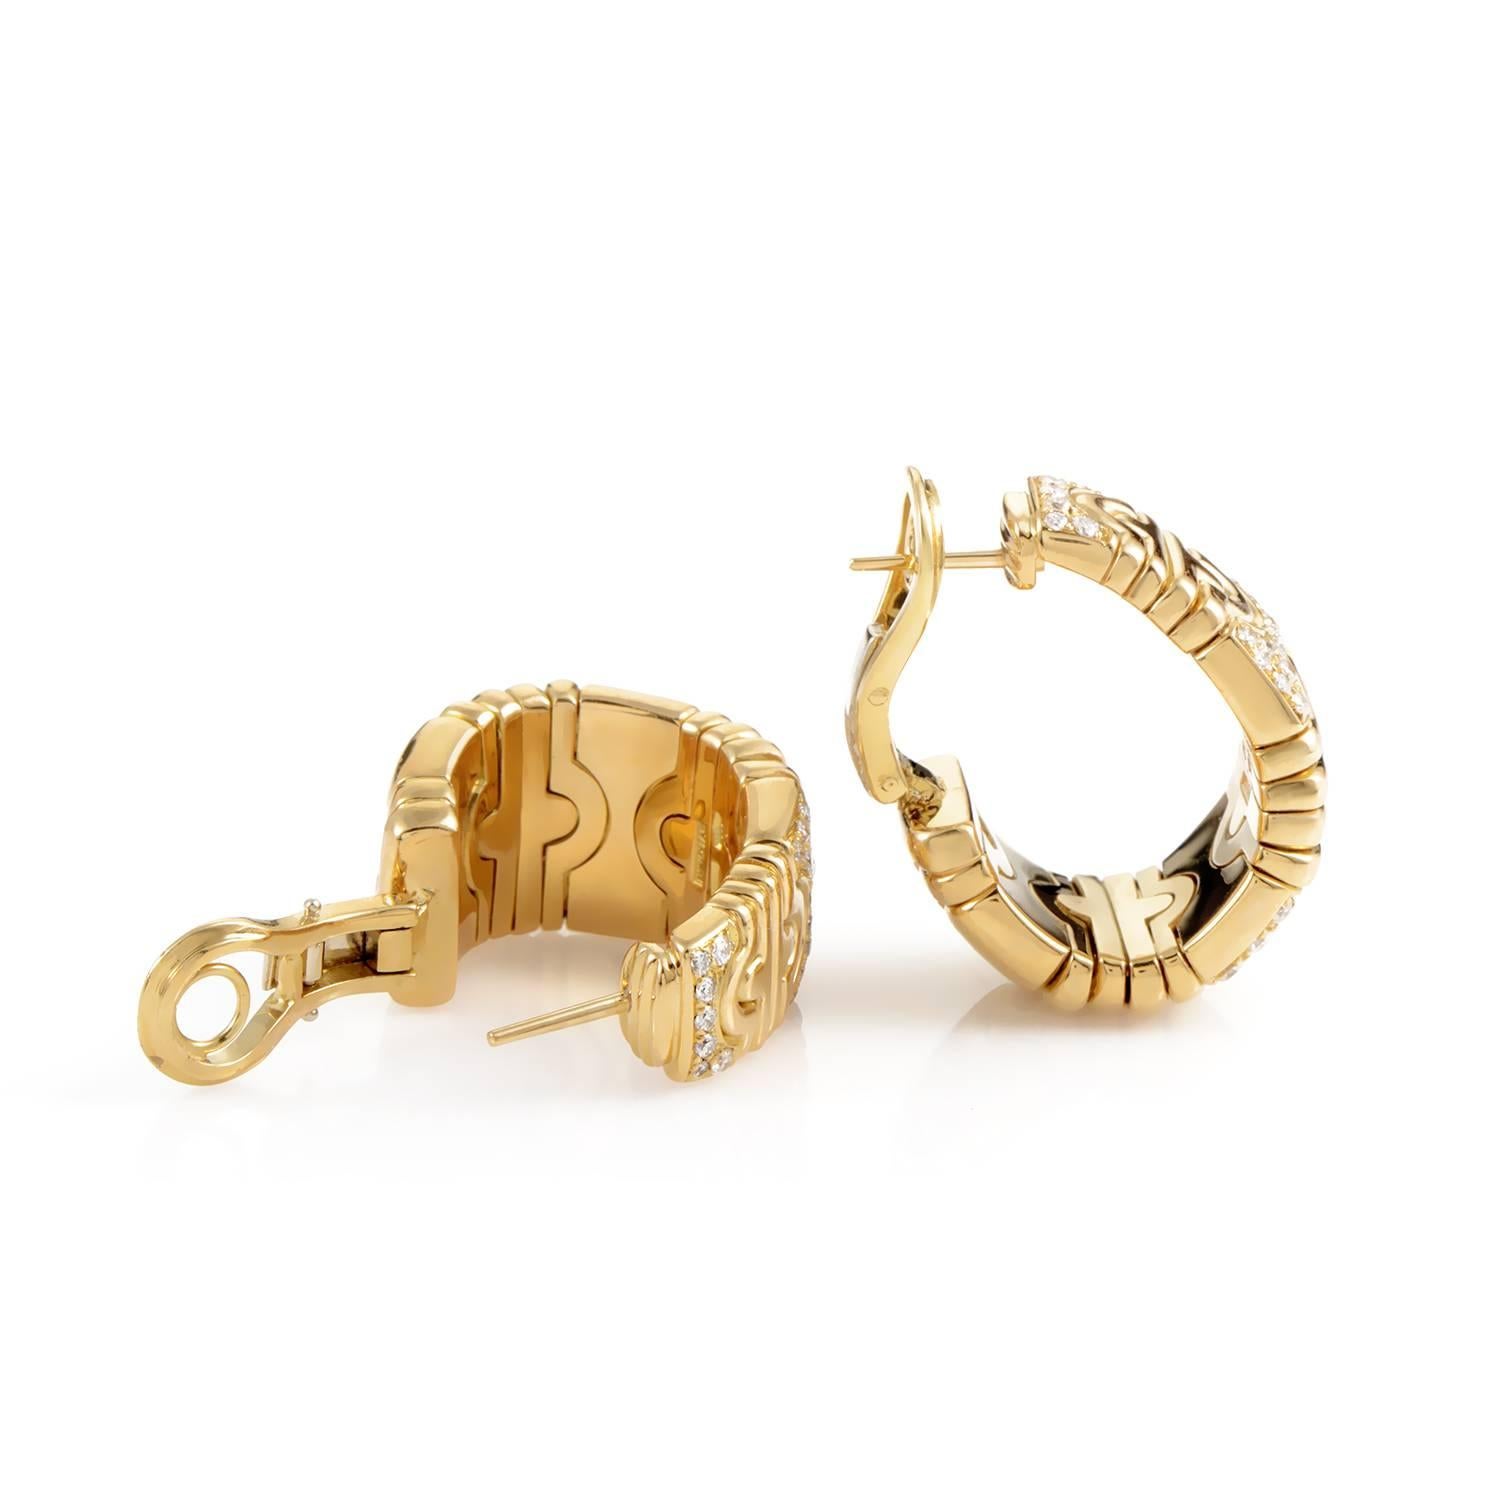 This pair of earrings from Bulgari's prestigious Parentesi collection are without comparison. The earrings are made of 18K yellow gold boasting the Parentesi design as well as a partial 1ct diamond pave.
Included Items: Manufacturer's Box